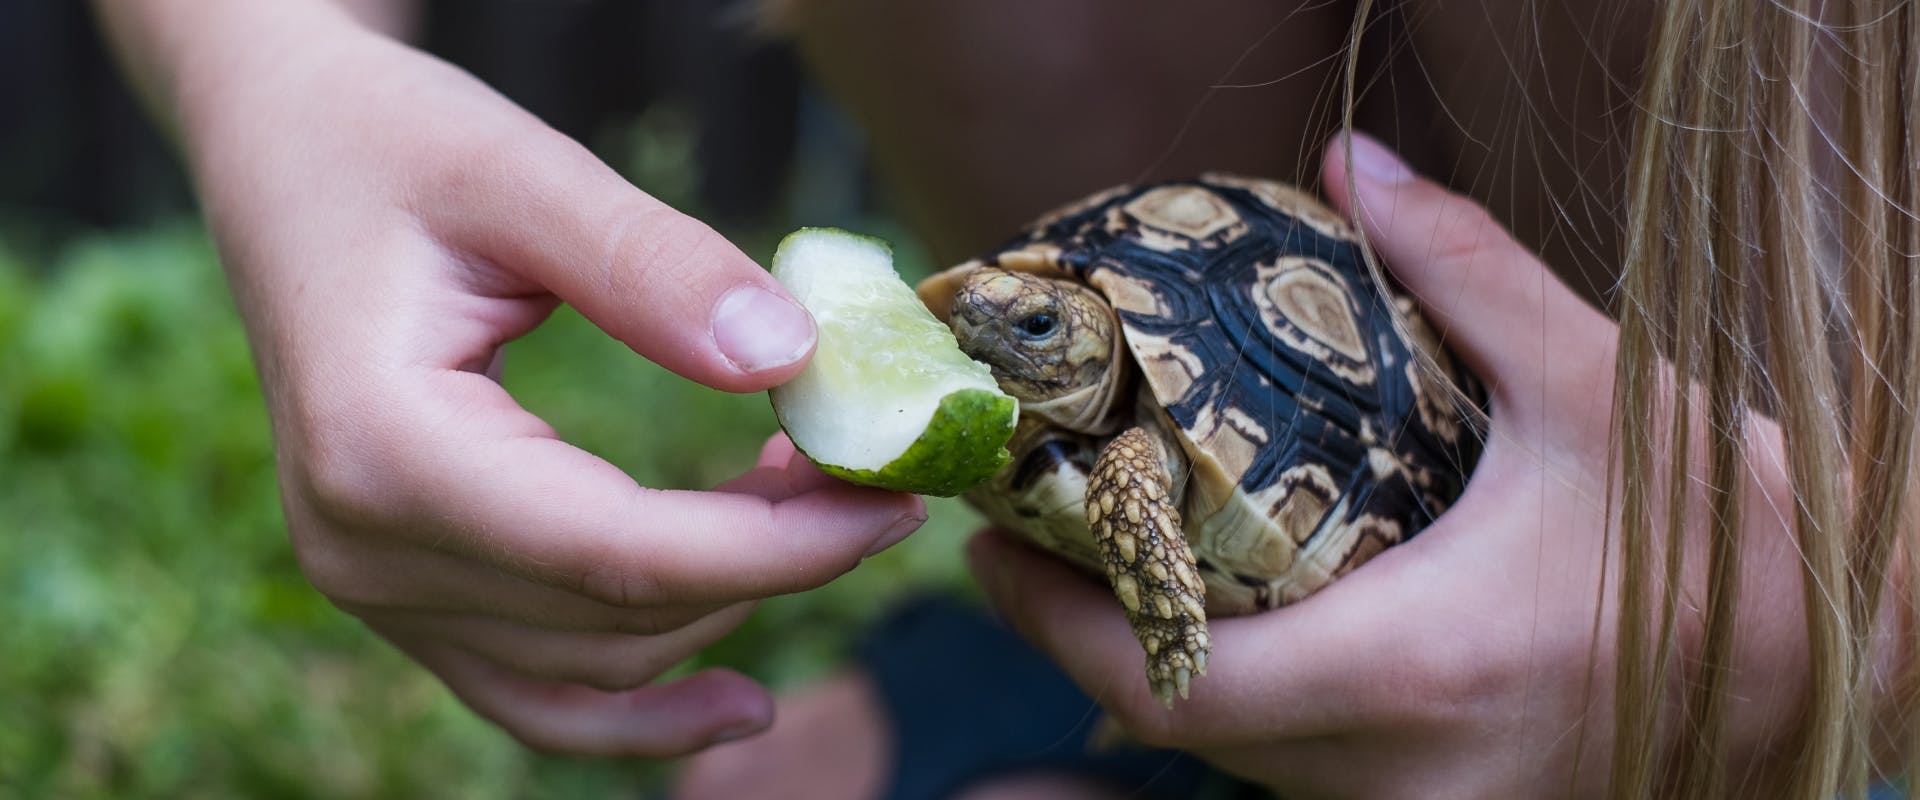 A pet tortoise is fed some cucumber.